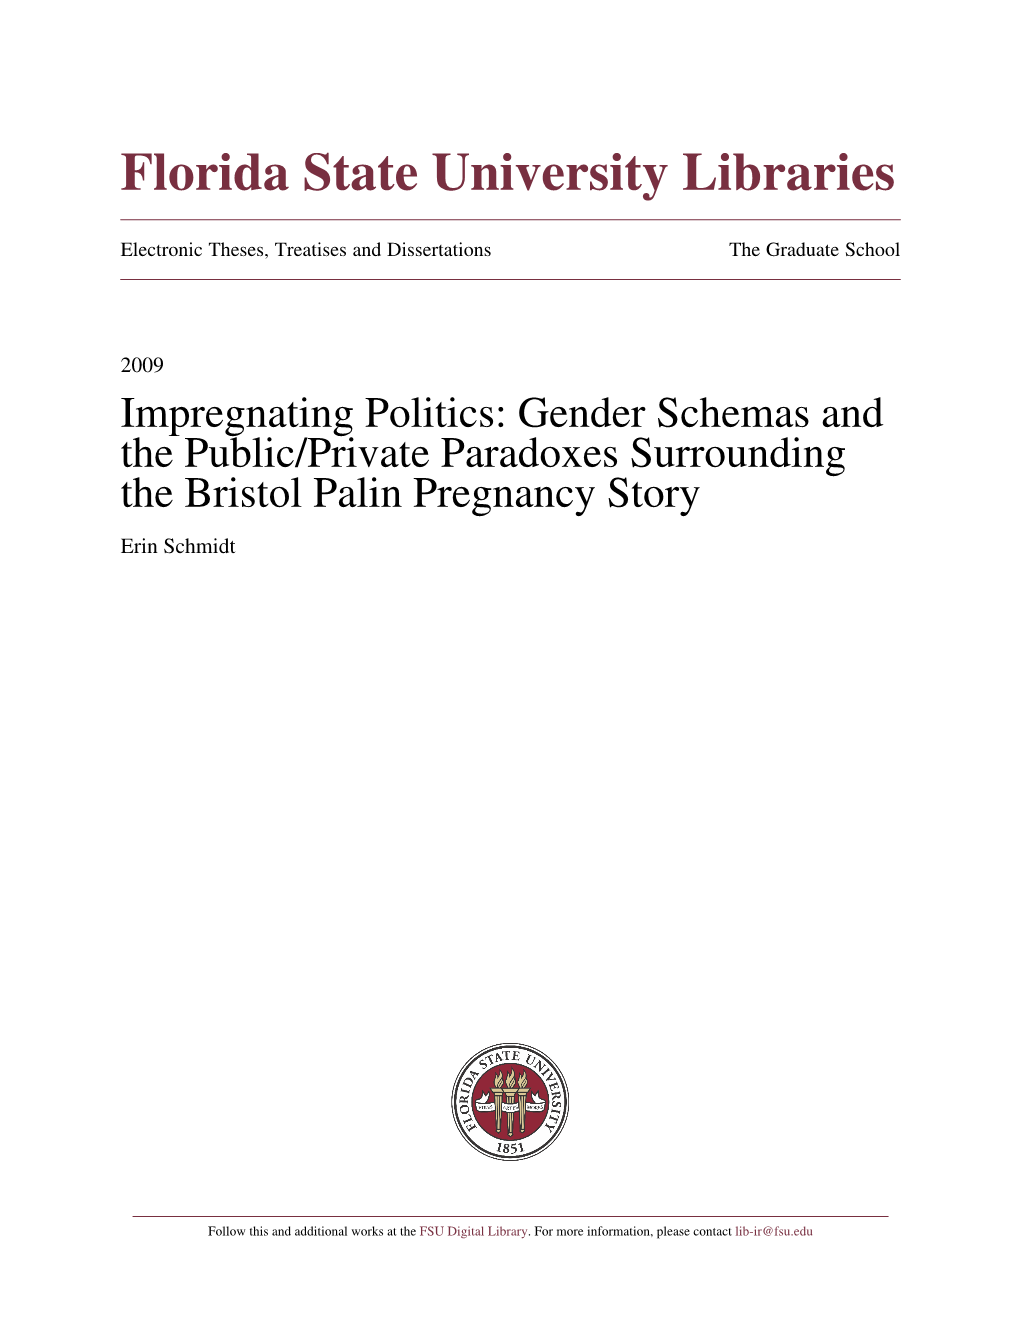 Gender Schemas and the Public/Private Paradoxes Surrounding the Bristol Palin Pregnancy Story Erin Schmidt